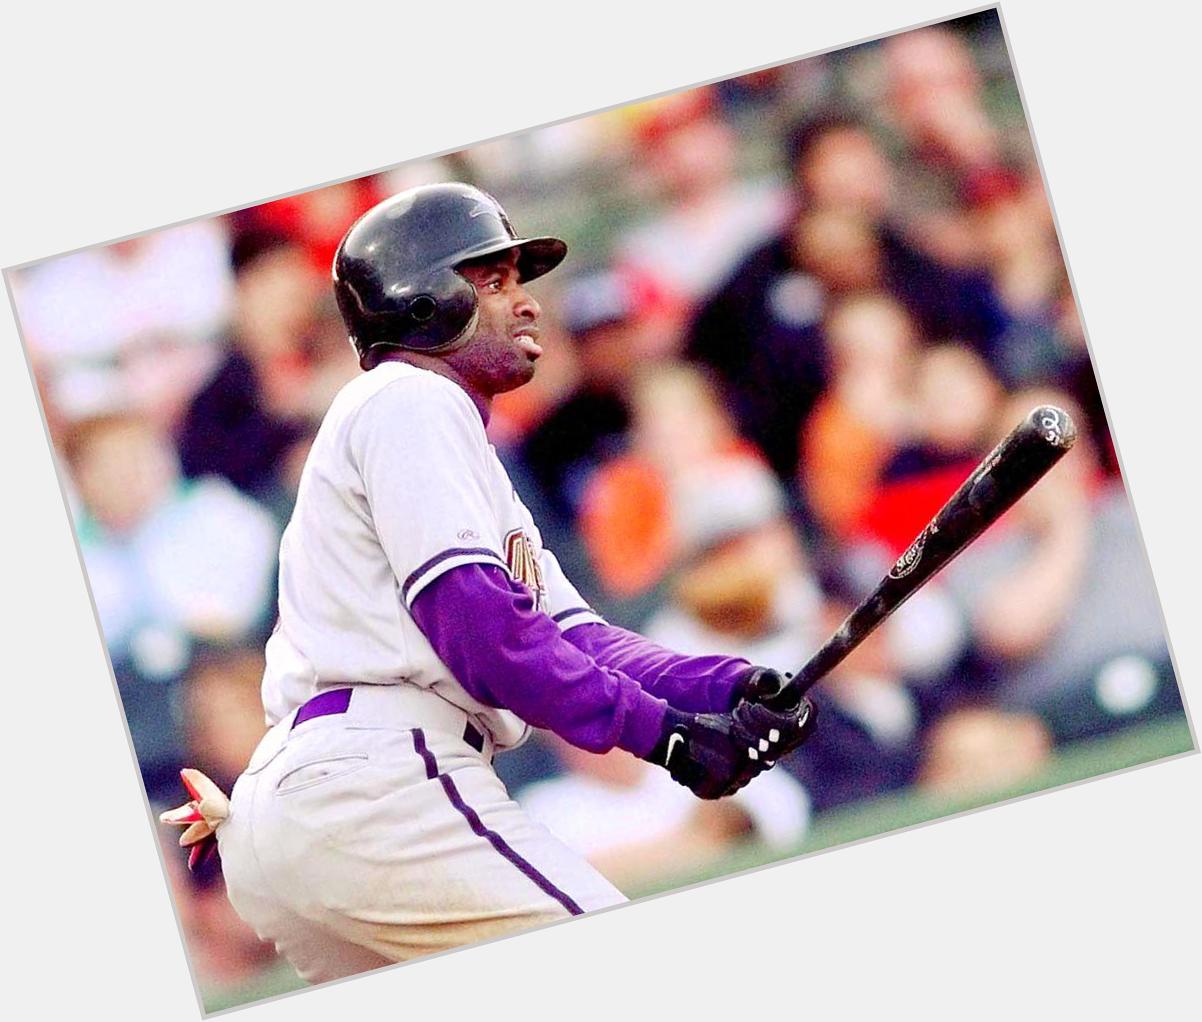 Happy 48th birthday to the man who scored the first run at Louisville, Slugger Field on 4/12/2000... Deion Sanders! 